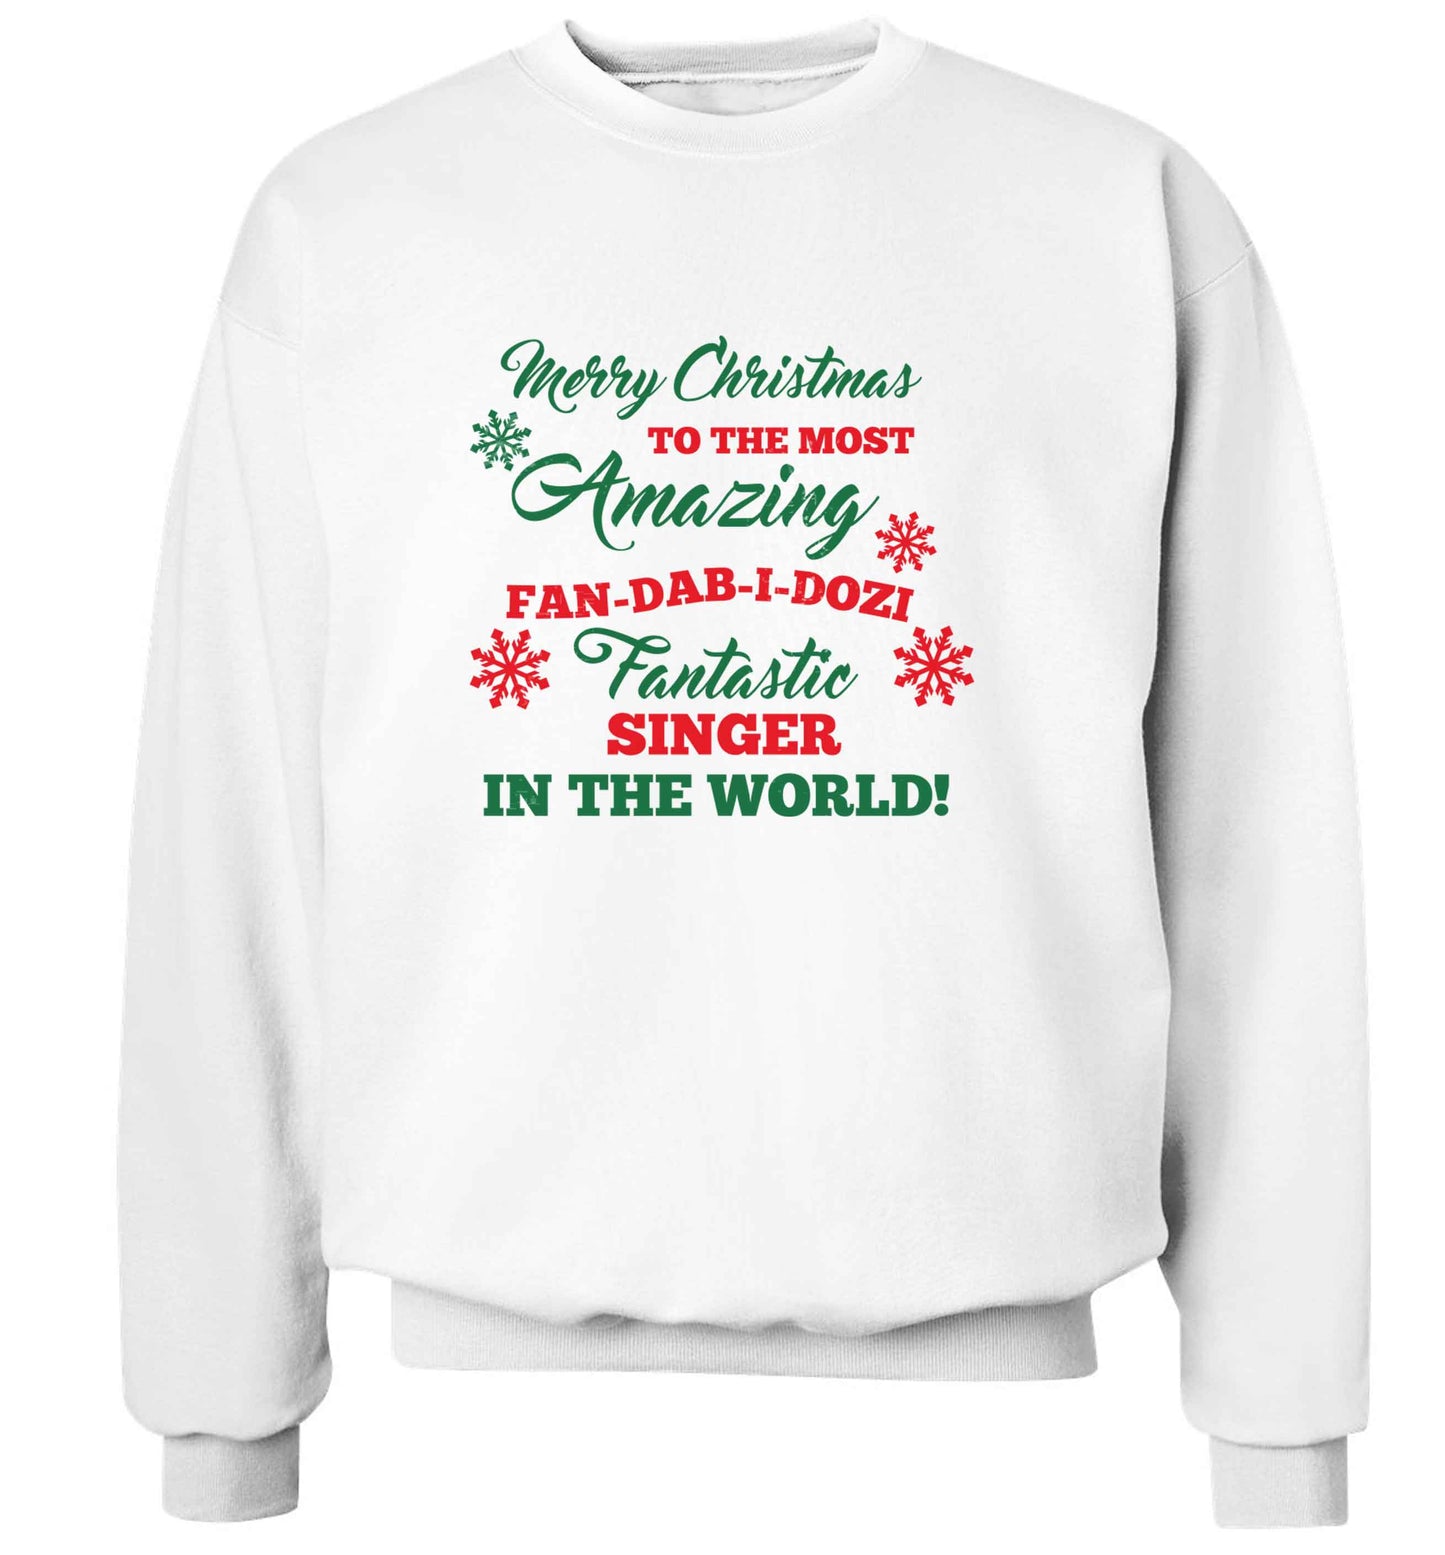 Merry Christmas to the most amazing singer in the world! adult's unisex white sweater 2XL